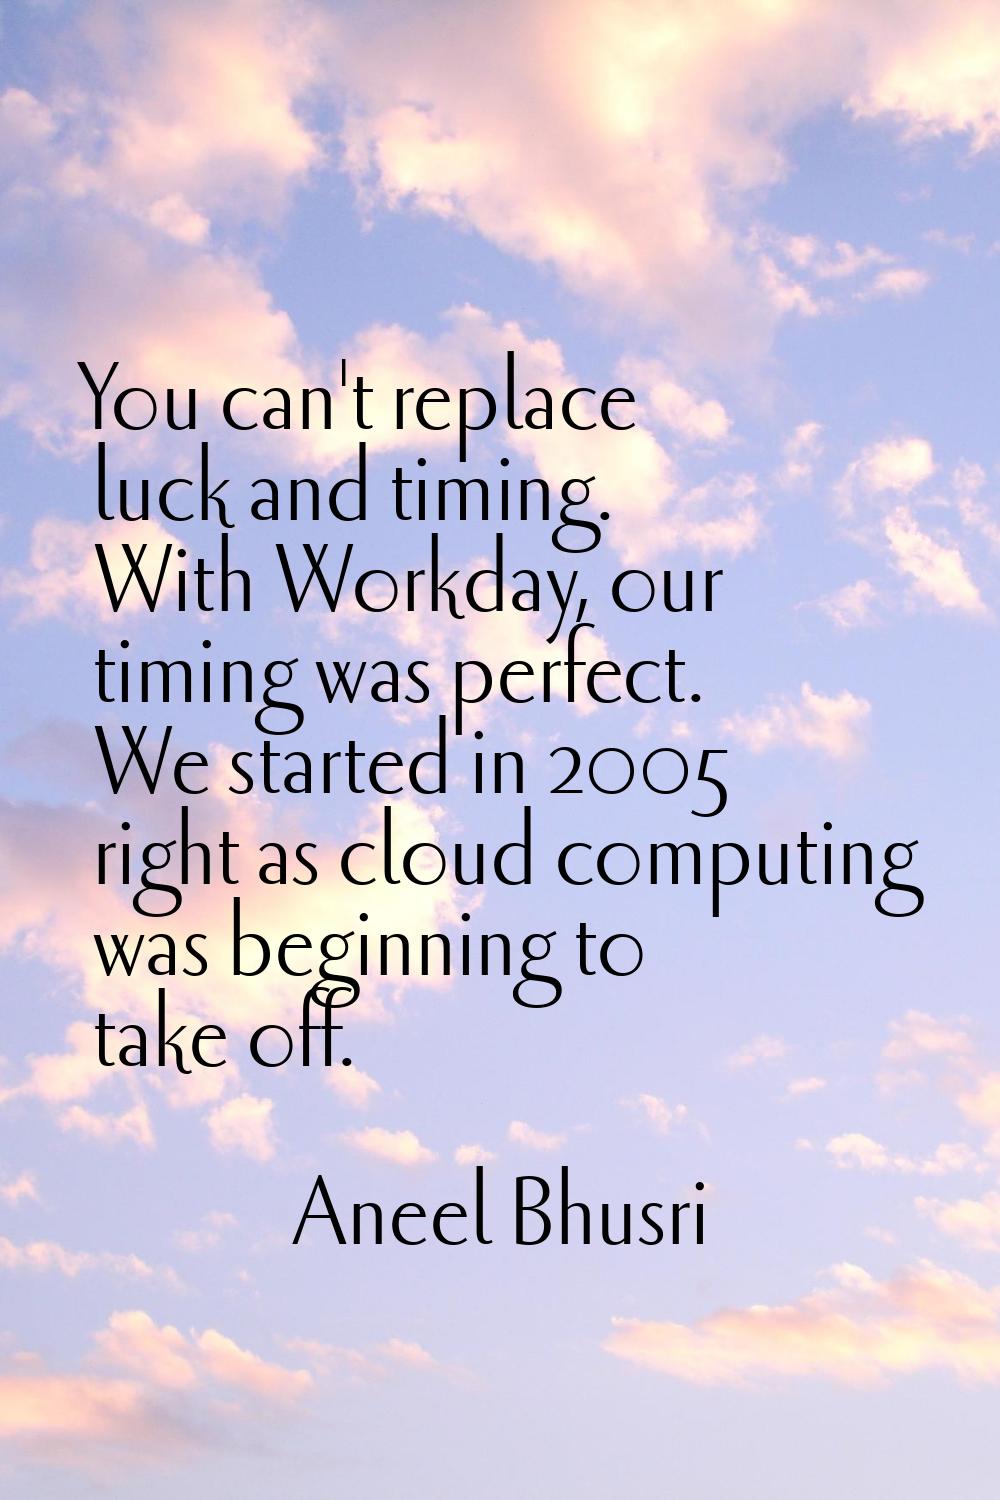 You can't replace luck and timing. With Workday, our timing was perfect. We started in 2005 right a